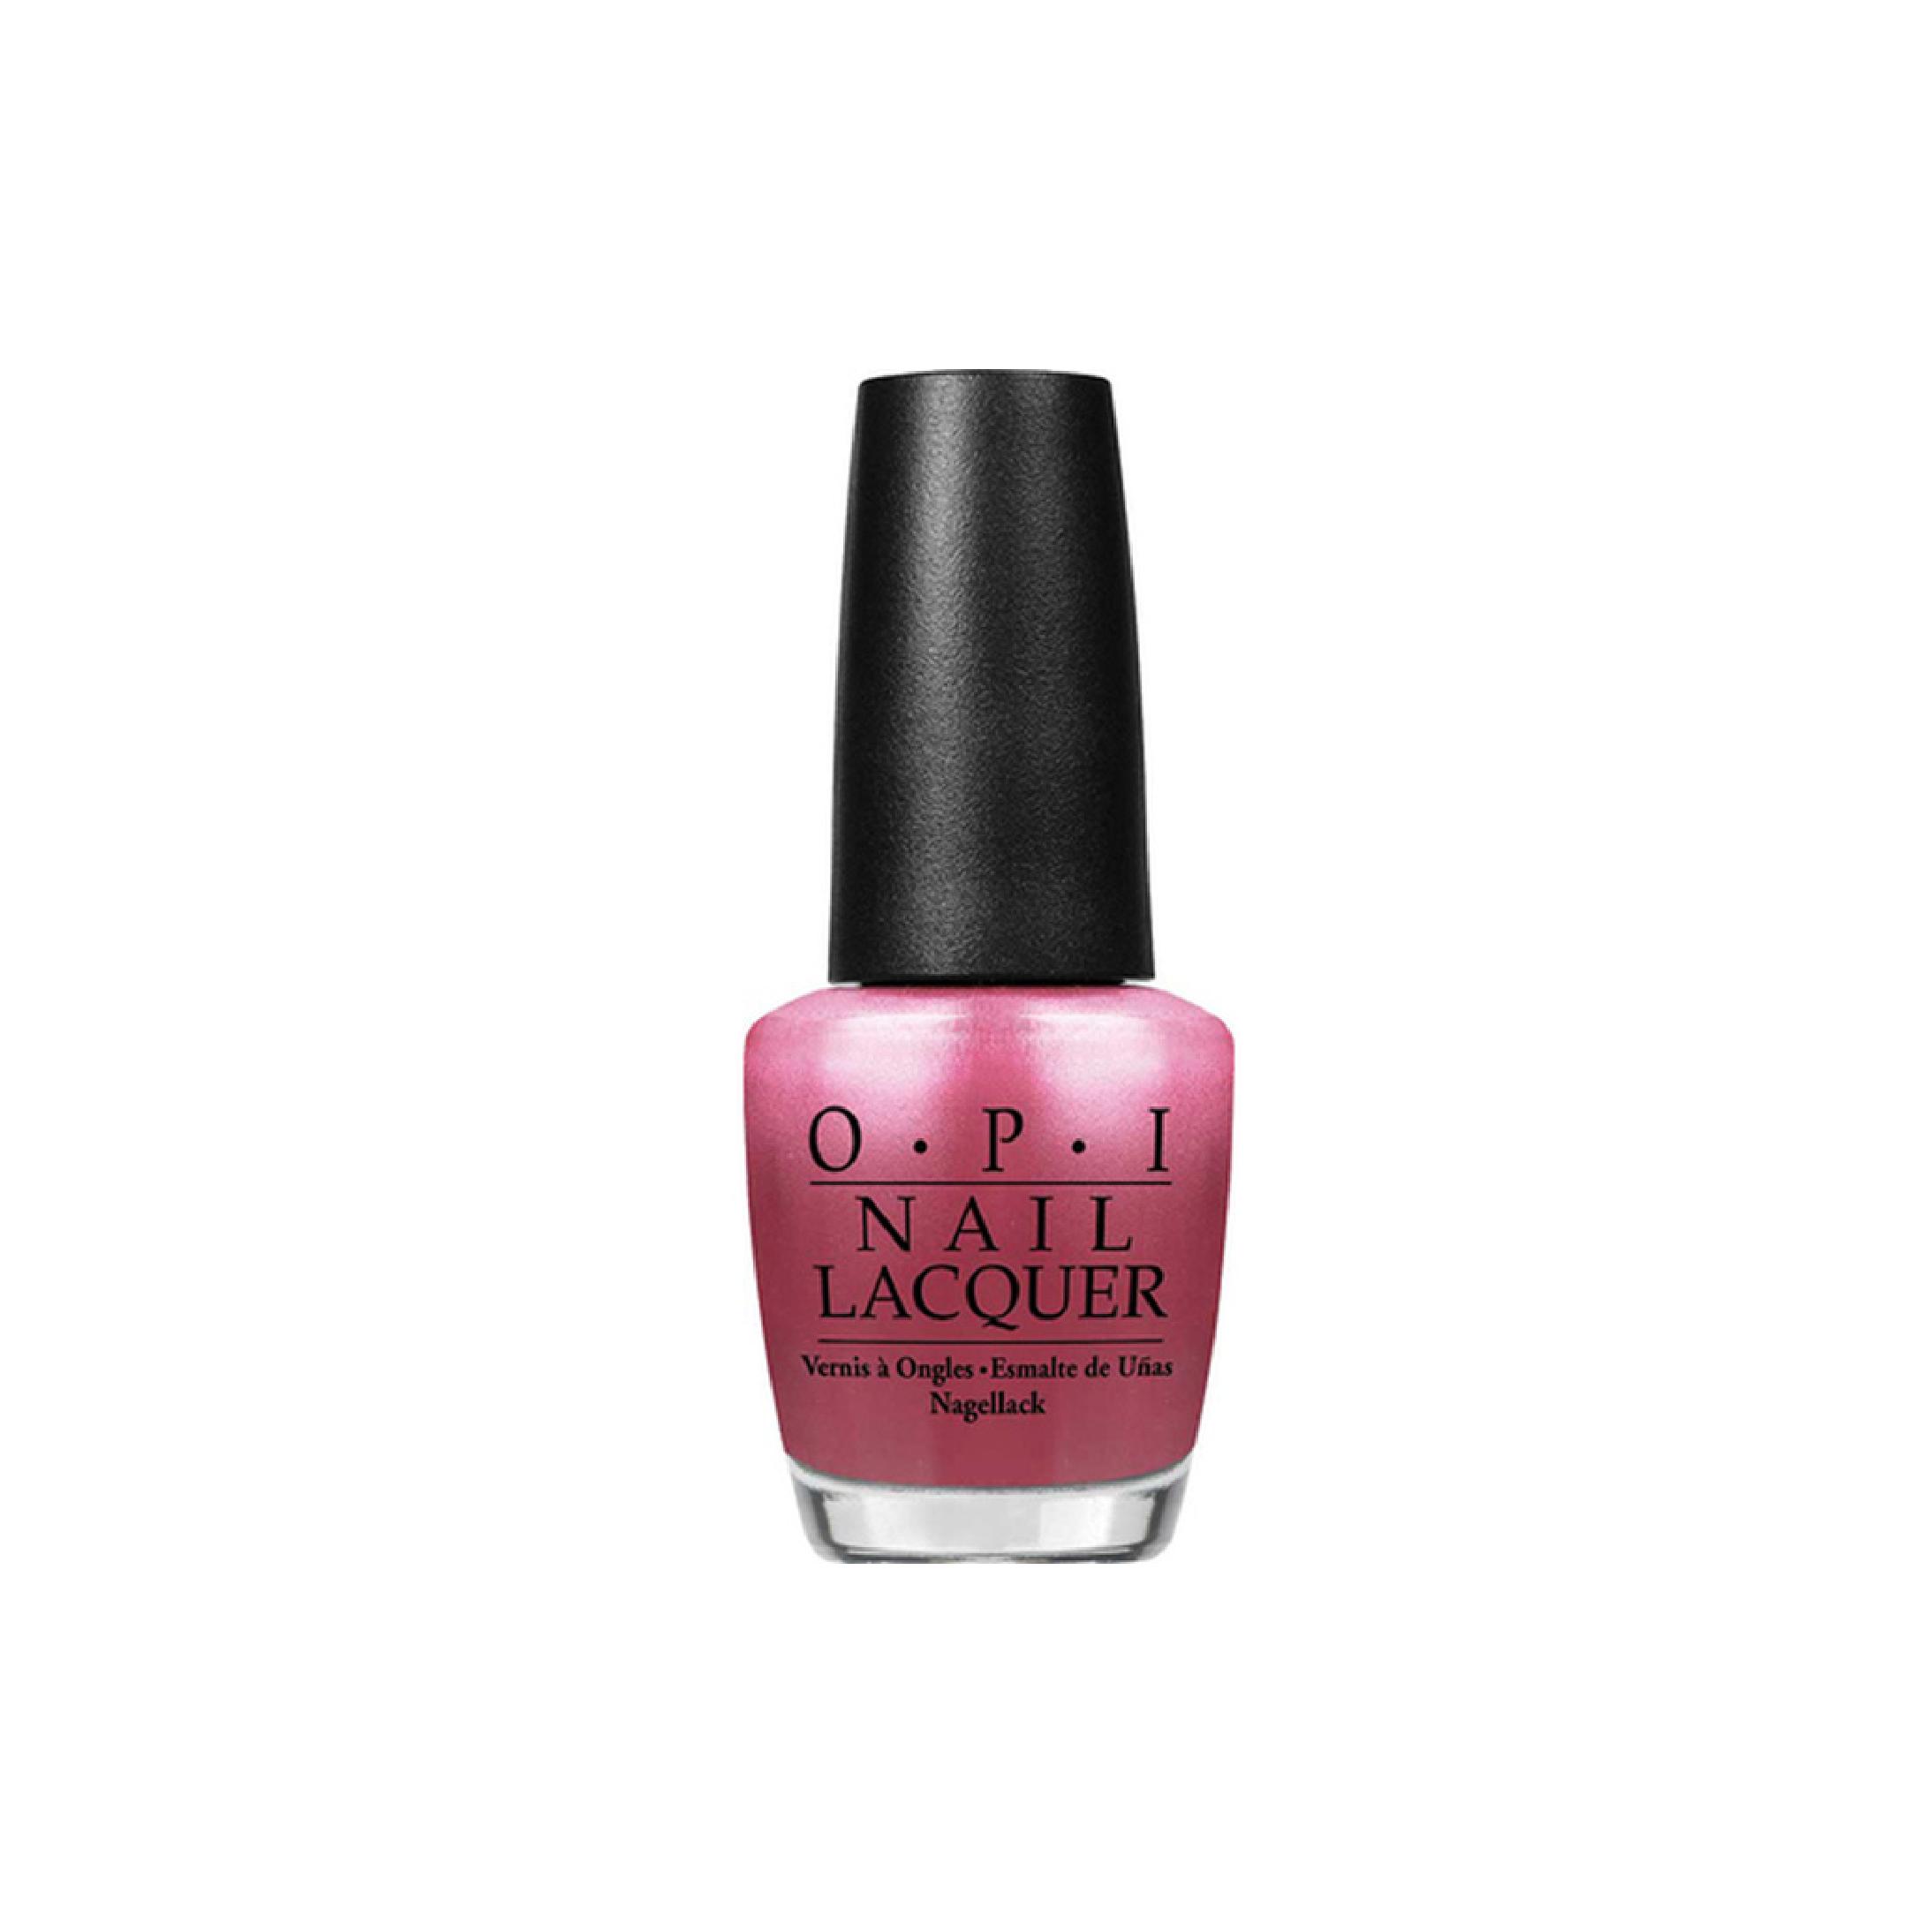 OPI Nail Lacquer - Mod About You - 0.5 fl oz India | Ubuy